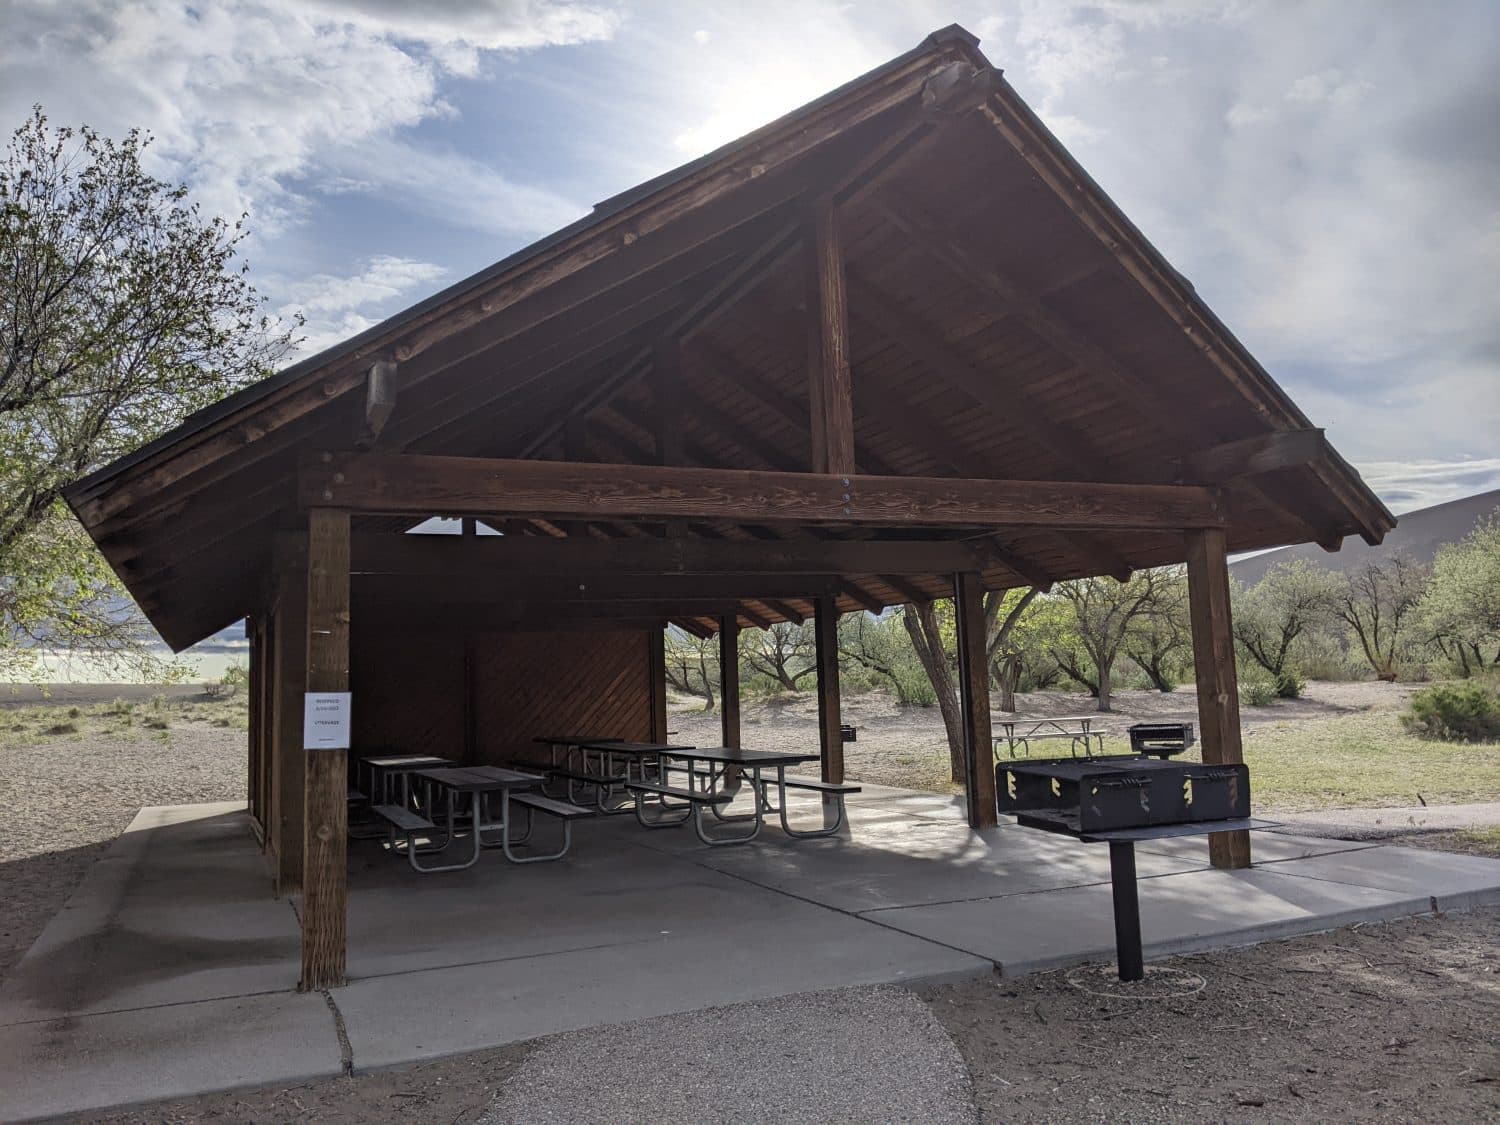 Big shelter with picnic benches and a BBQ at a picknick site in Bruneau Dunes state park